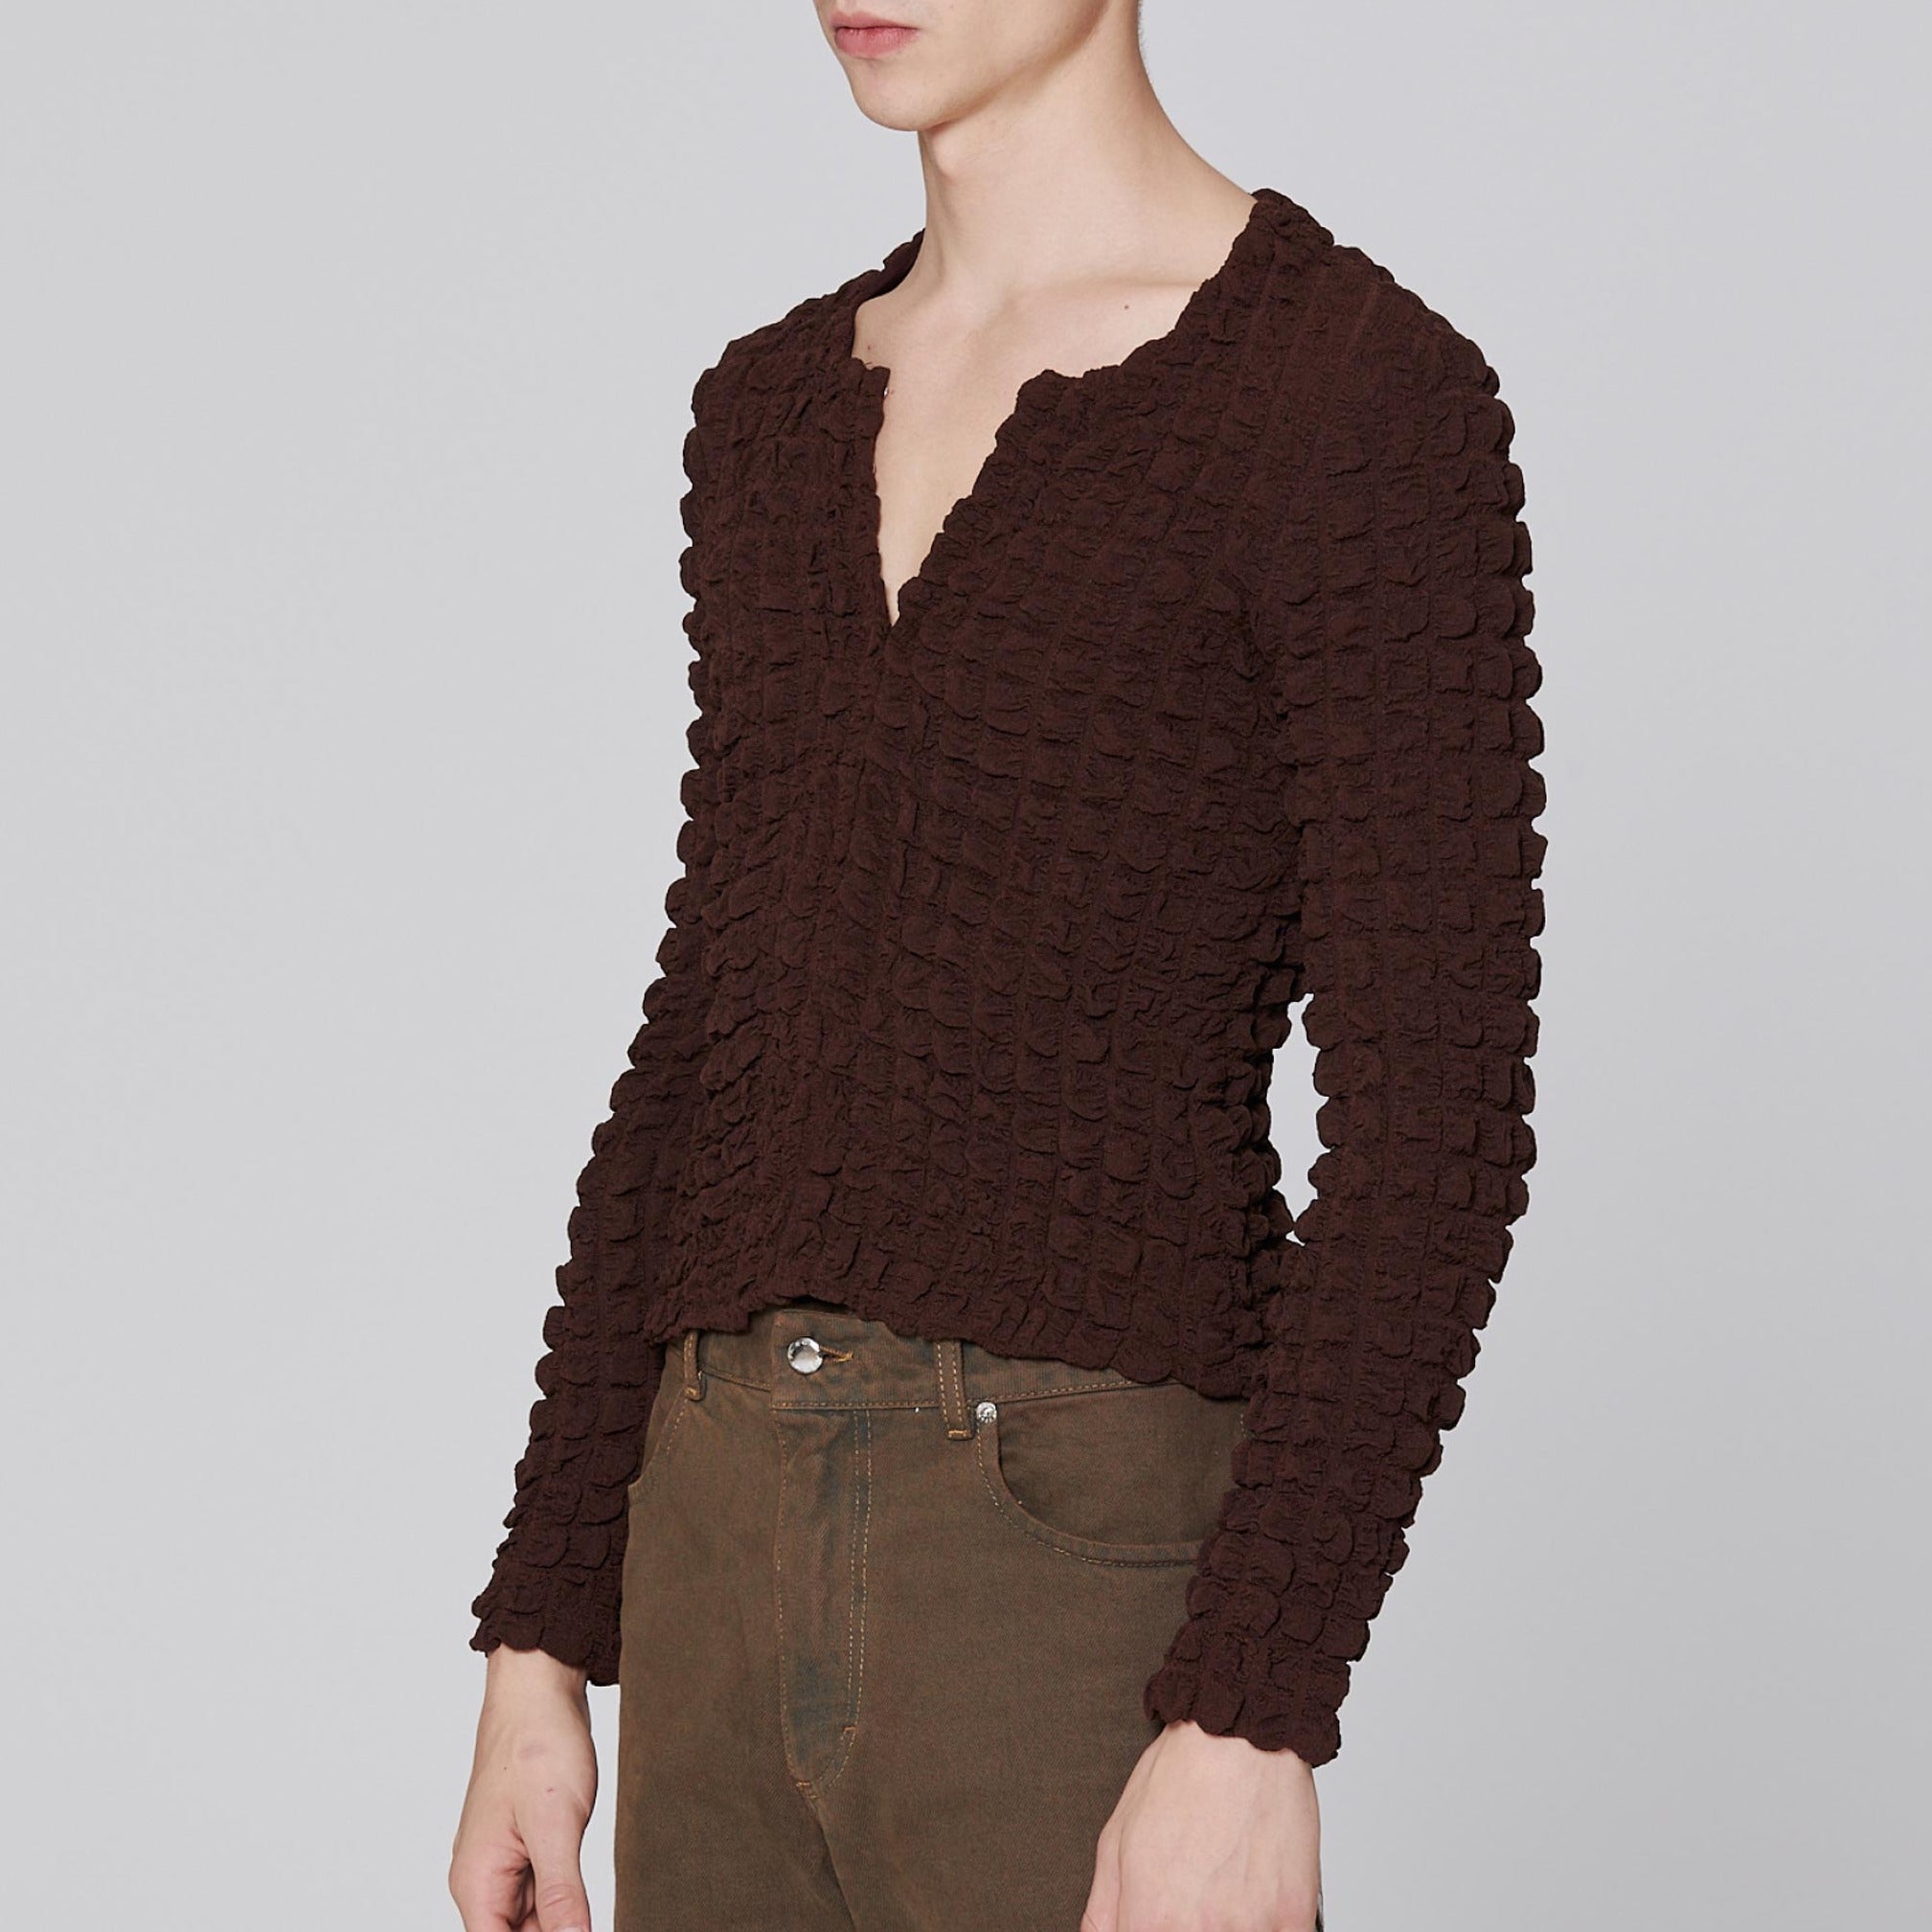 Side detail photo of model wearing the Bubble Cardigan - Umber .